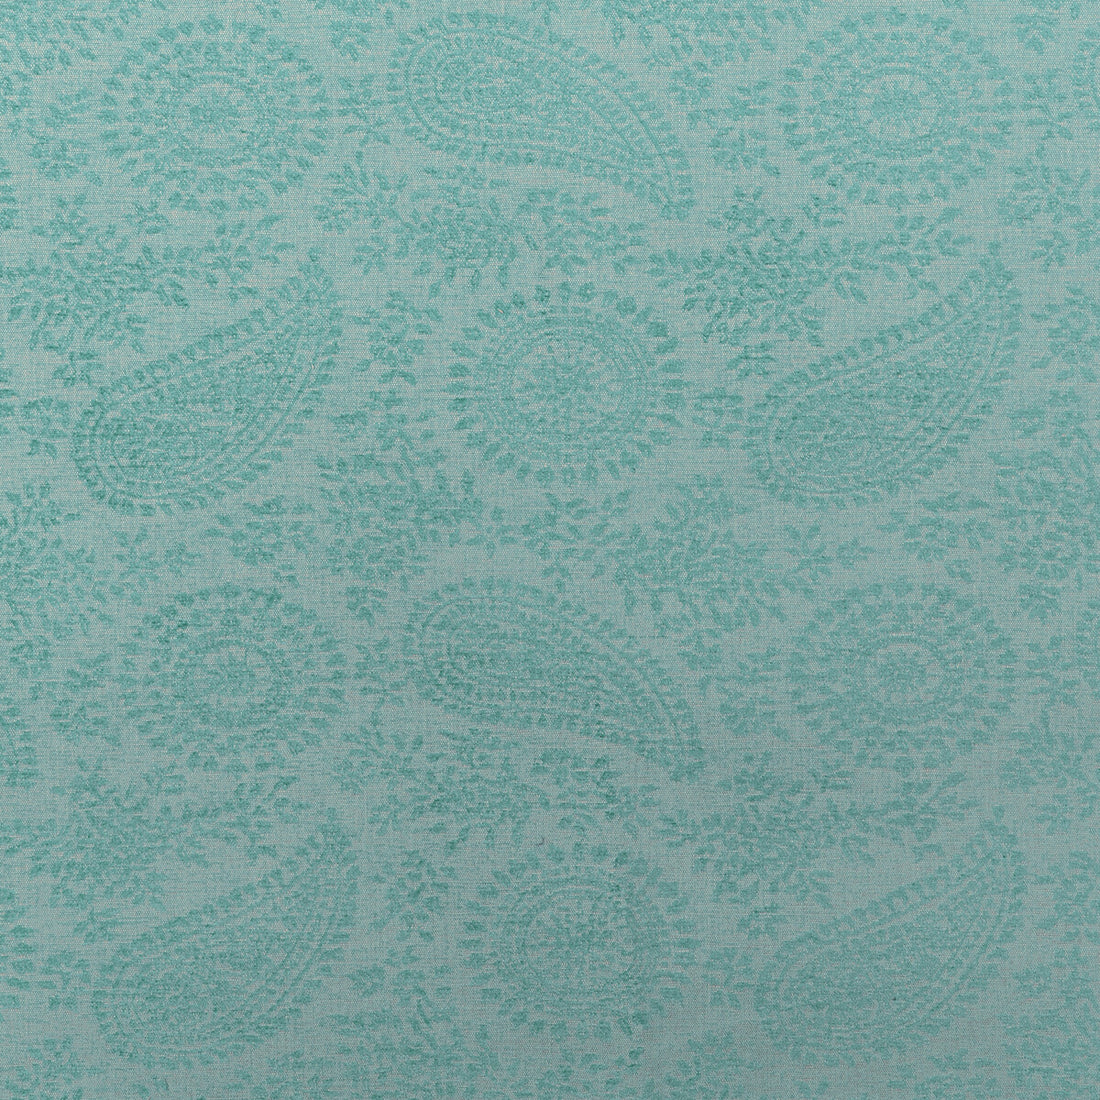 Wylder fabric in sea green color - pattern 36269.135.0 - by Kravet Contract in the Gis Crypton collection